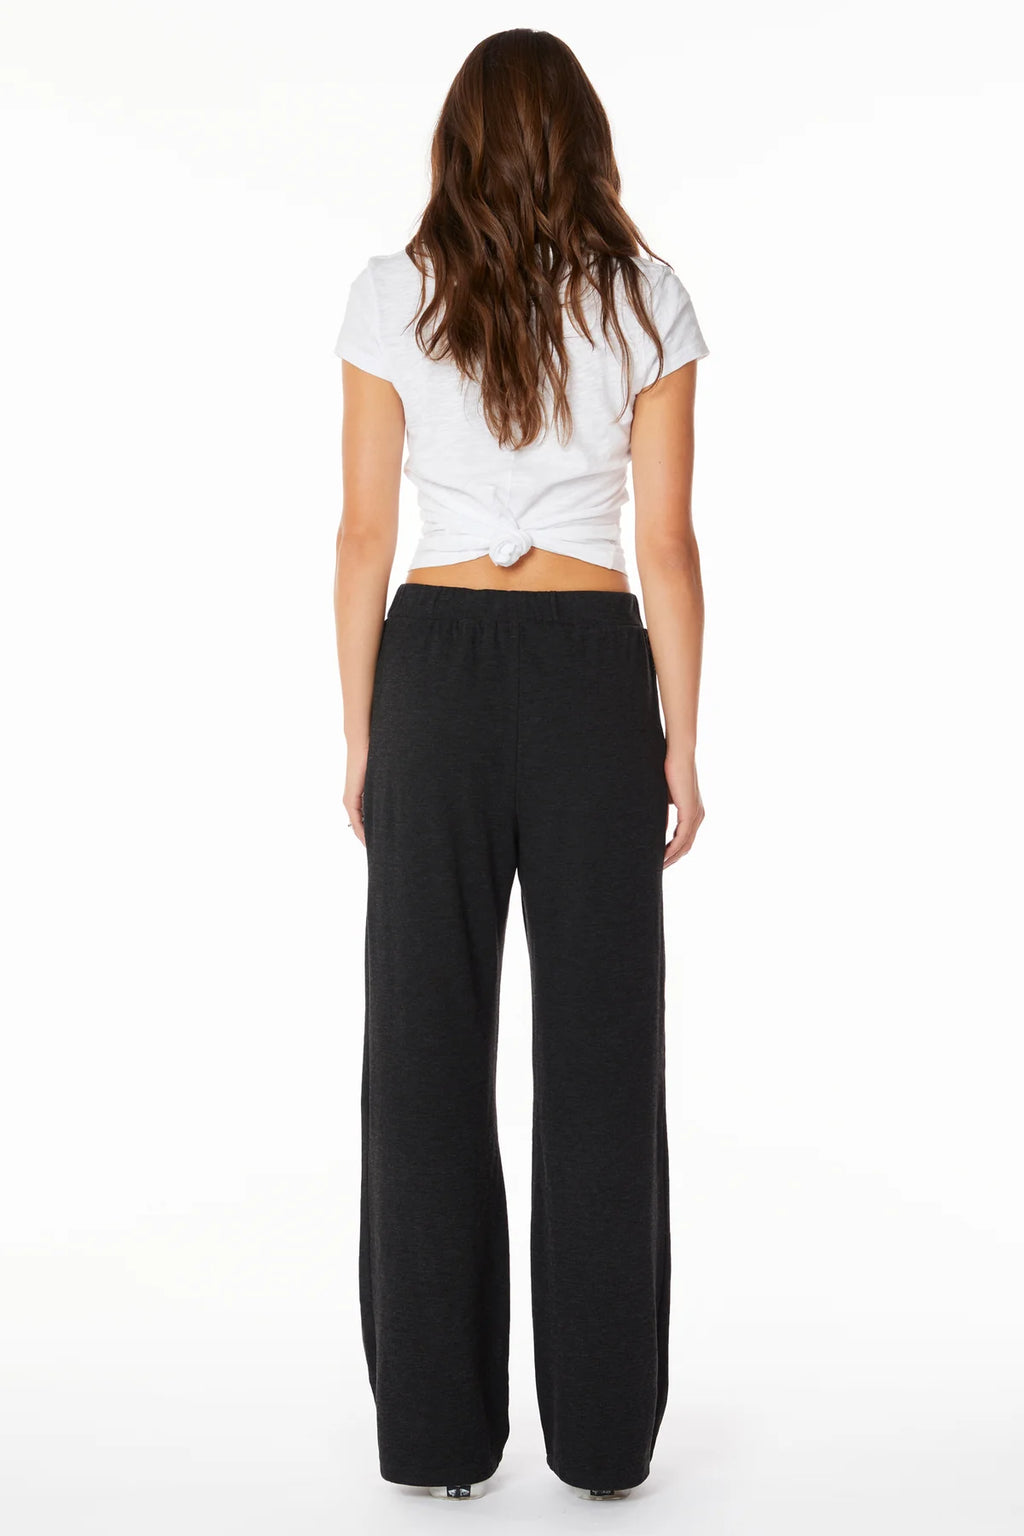 Wide Leg Pleated Pant- Muted Black